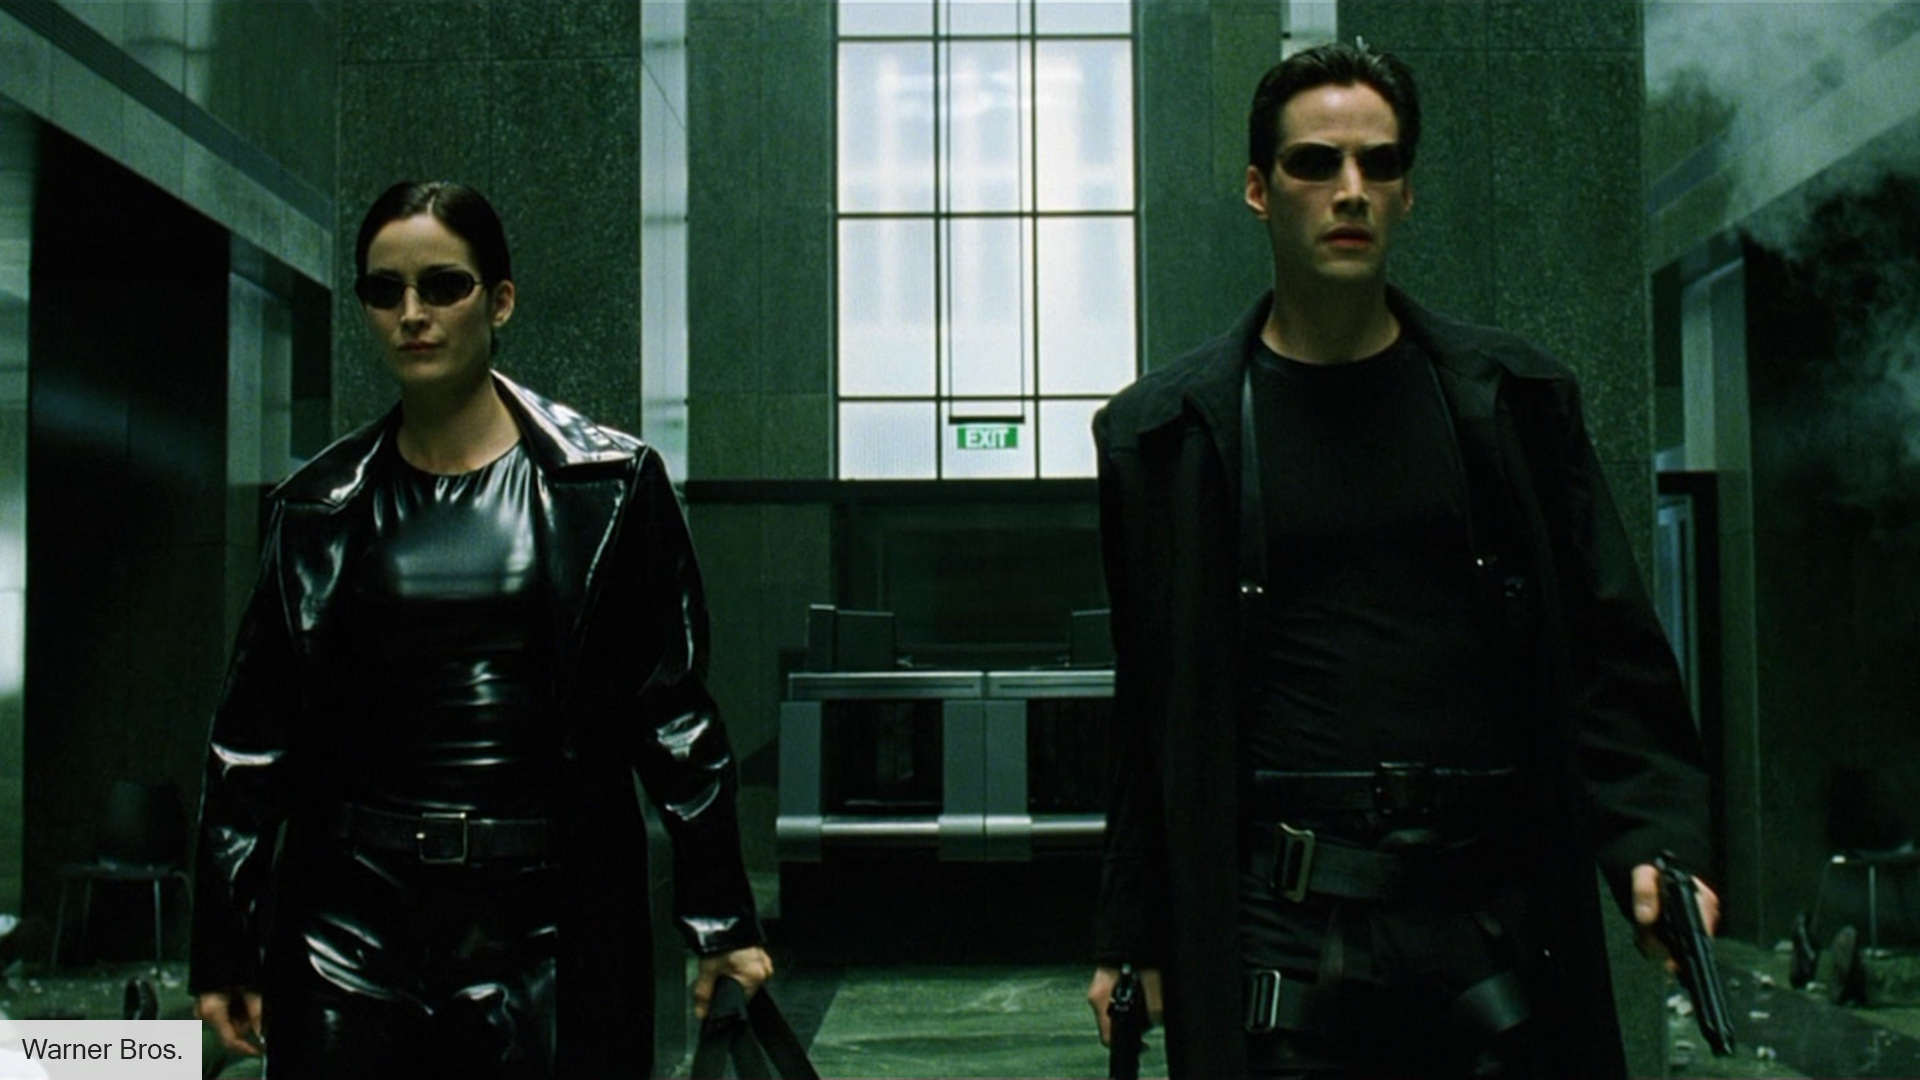 The Matrix order: how to watch The Matrix movies the right way | The Digital Fix